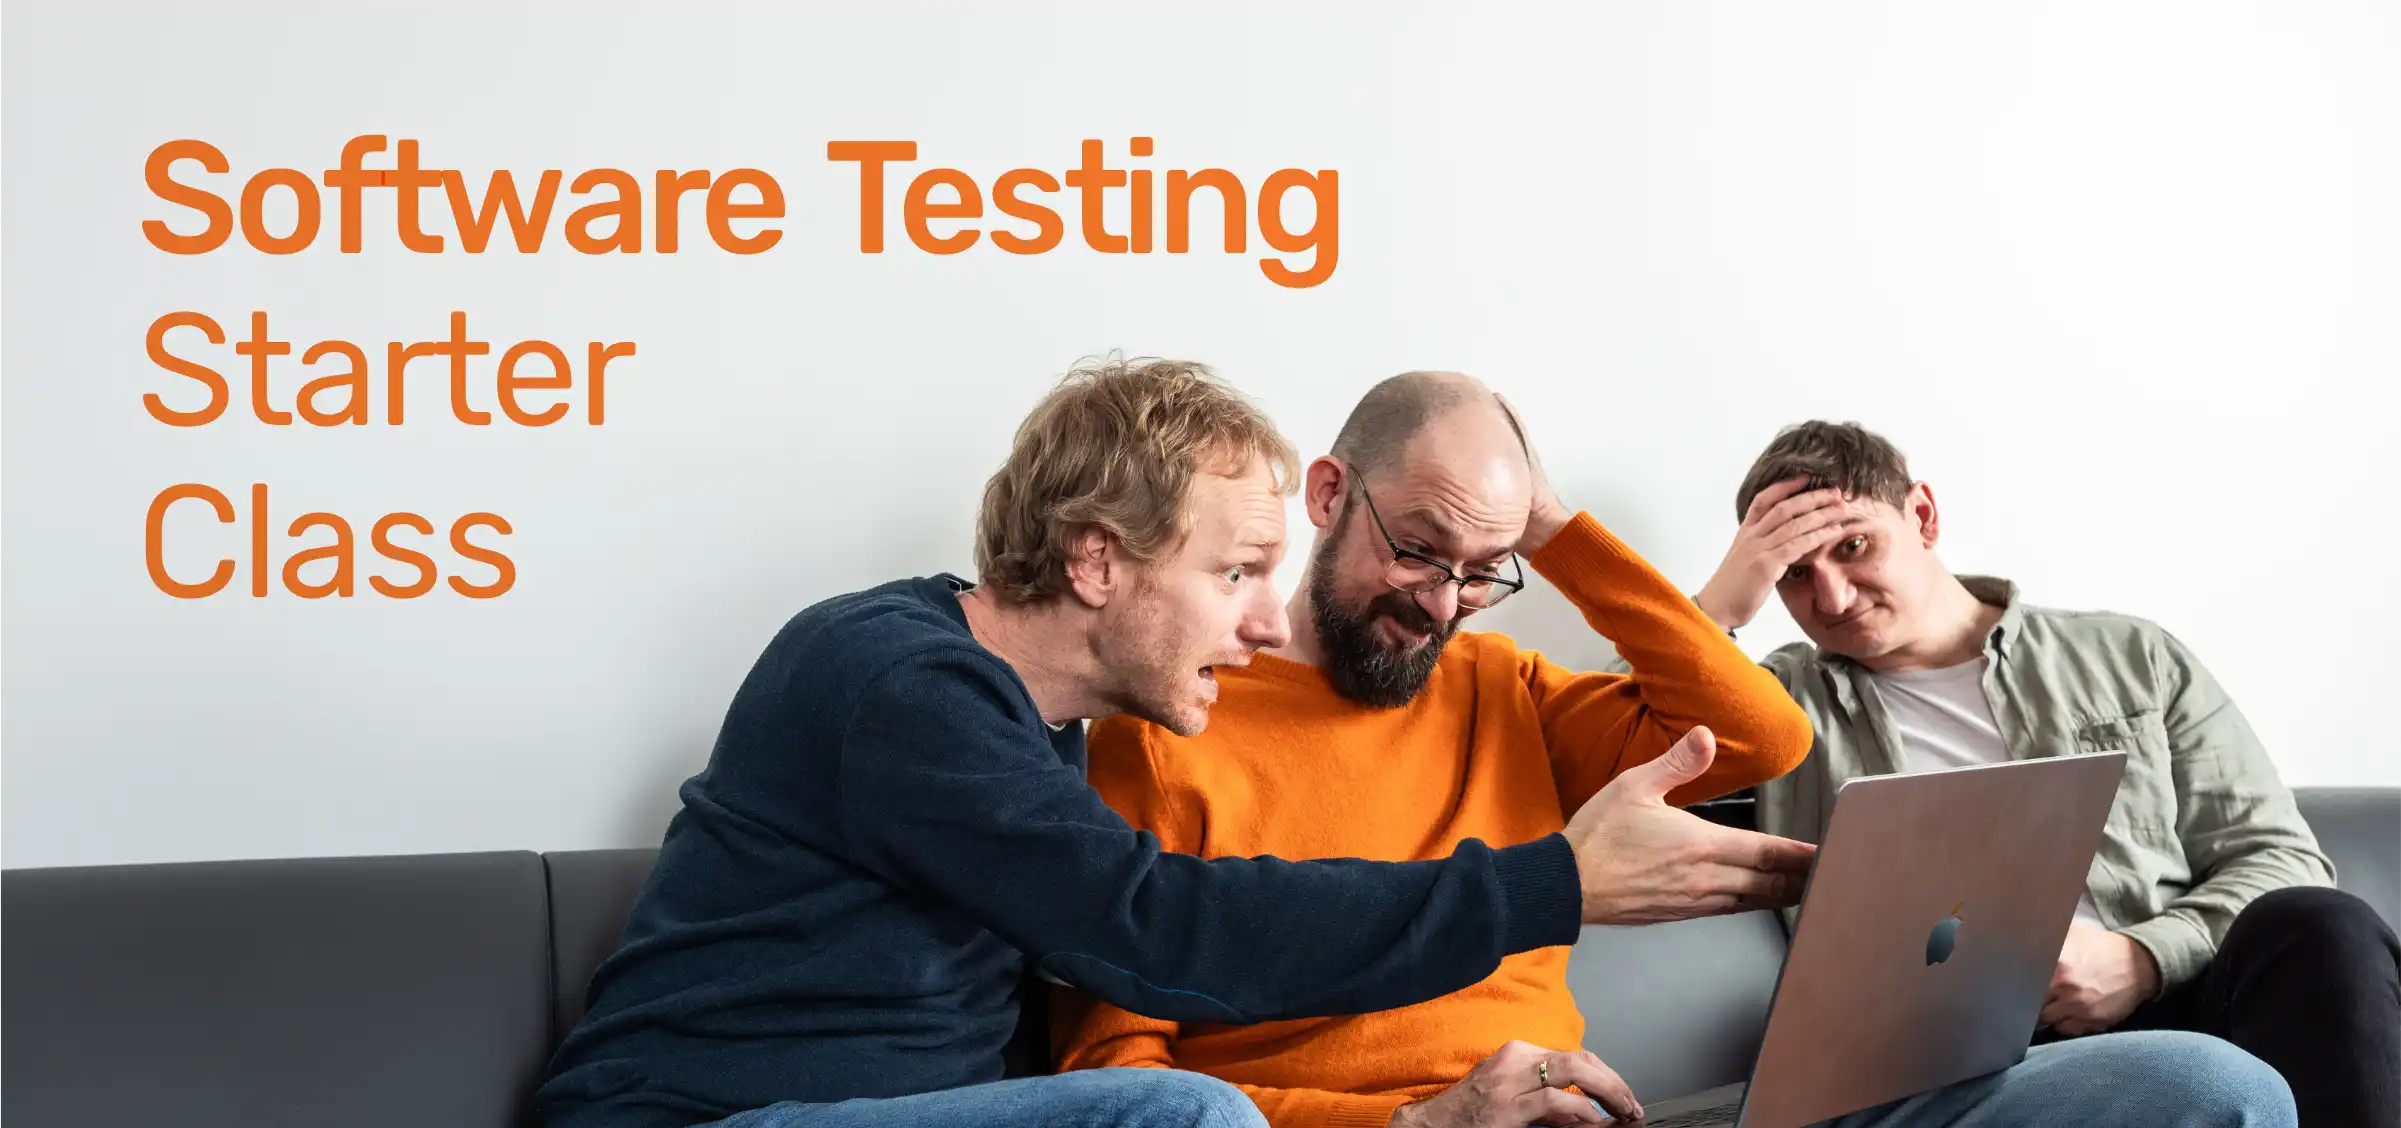 Content preview for Software Testing Starter Class